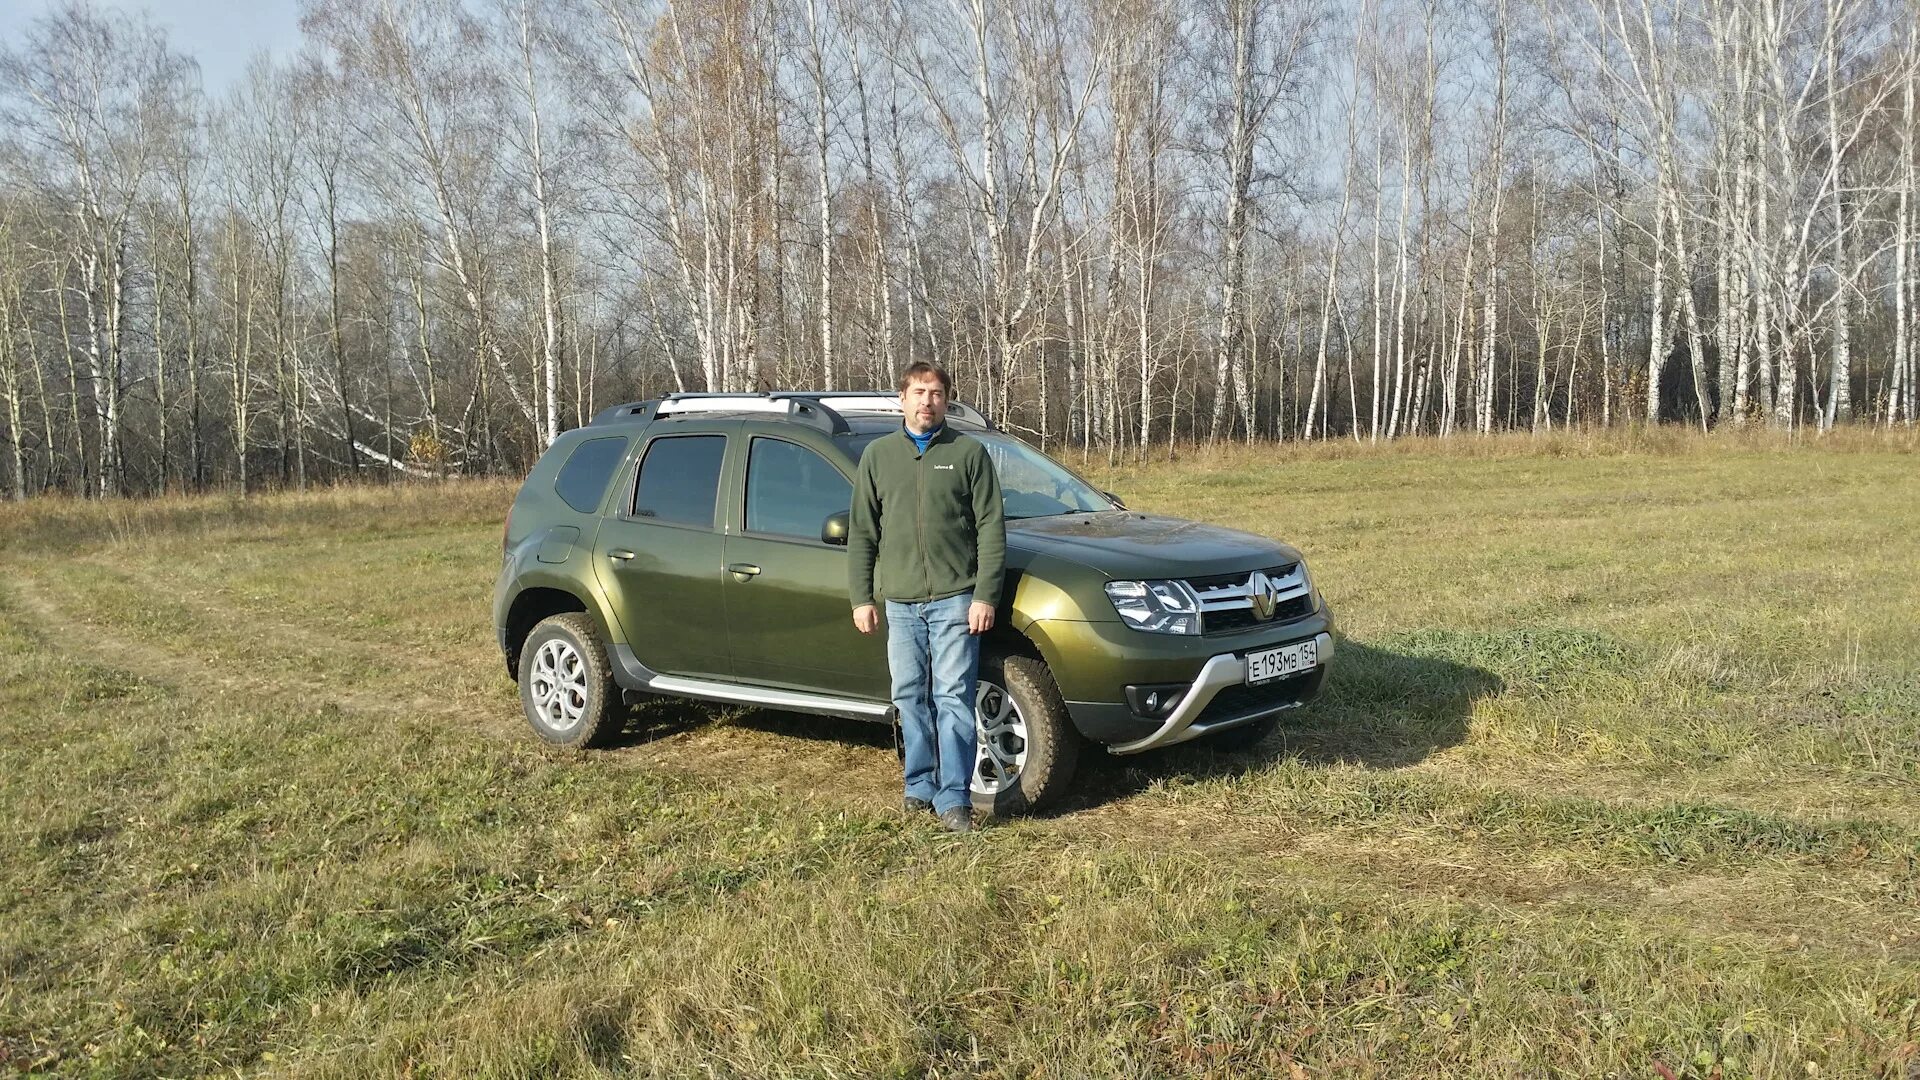 Рено Дастер 2.0 2wd. Рено Дастер 4wd. Renault Duster. 2.0 Ltr 4 WD. Владелец Renault Duster.